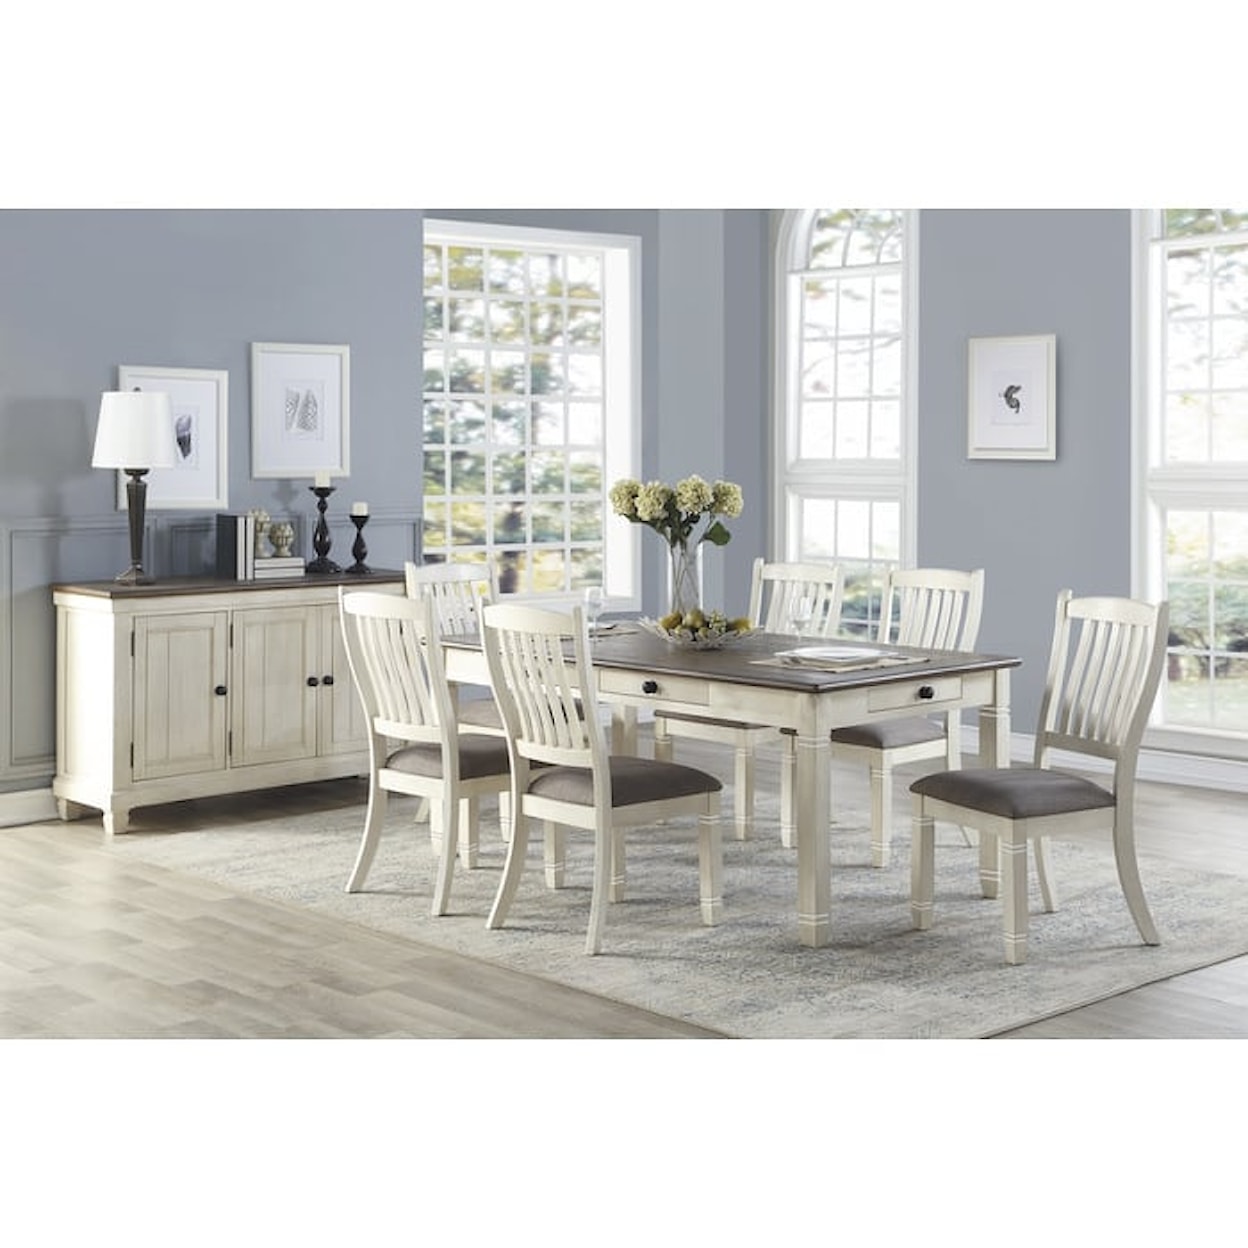 Homelegance Granby Dining Chair